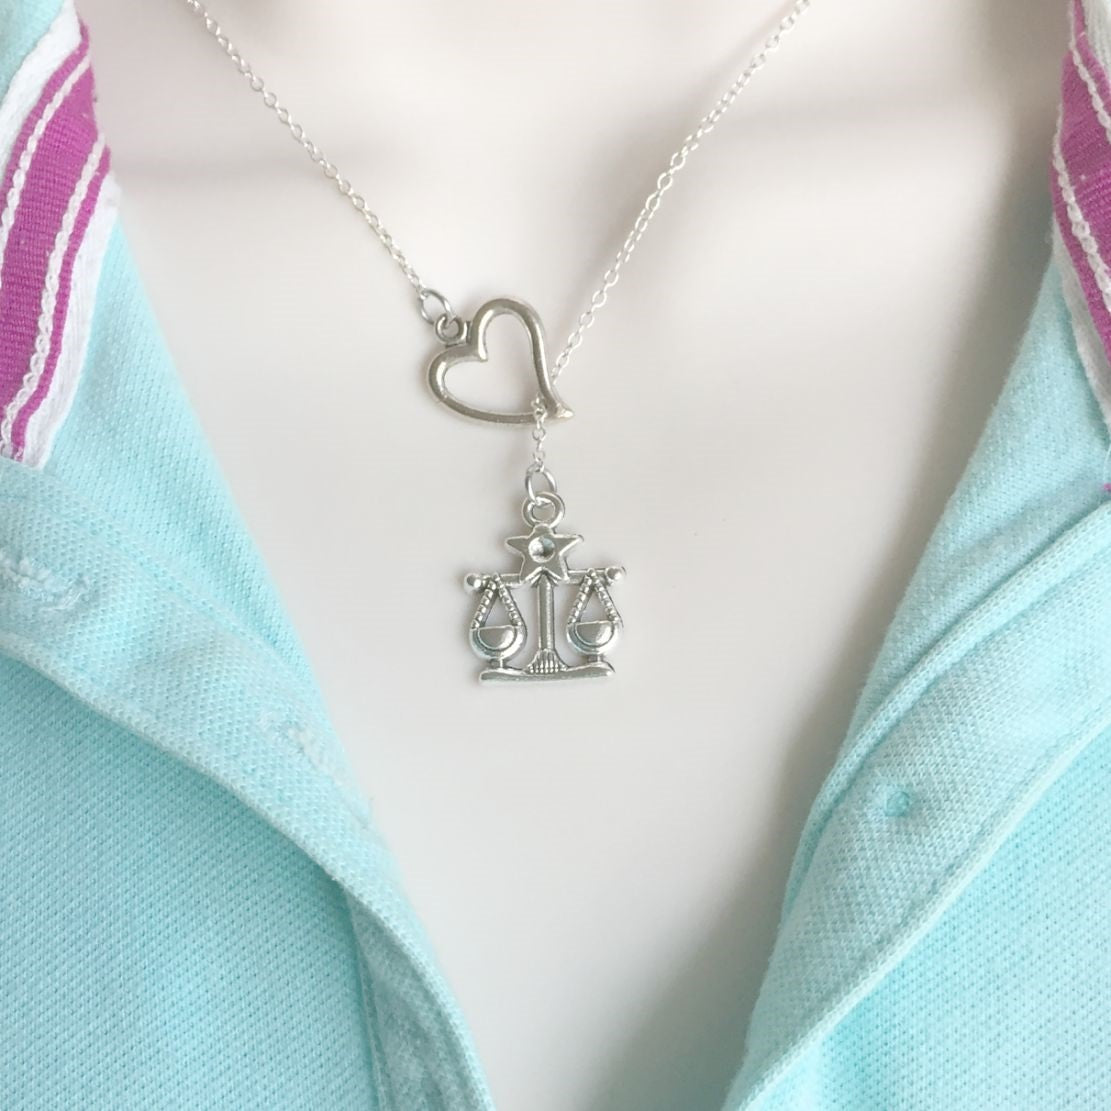 SCALE OF JUSTICE Charm Silver Lariat Y Necklace.